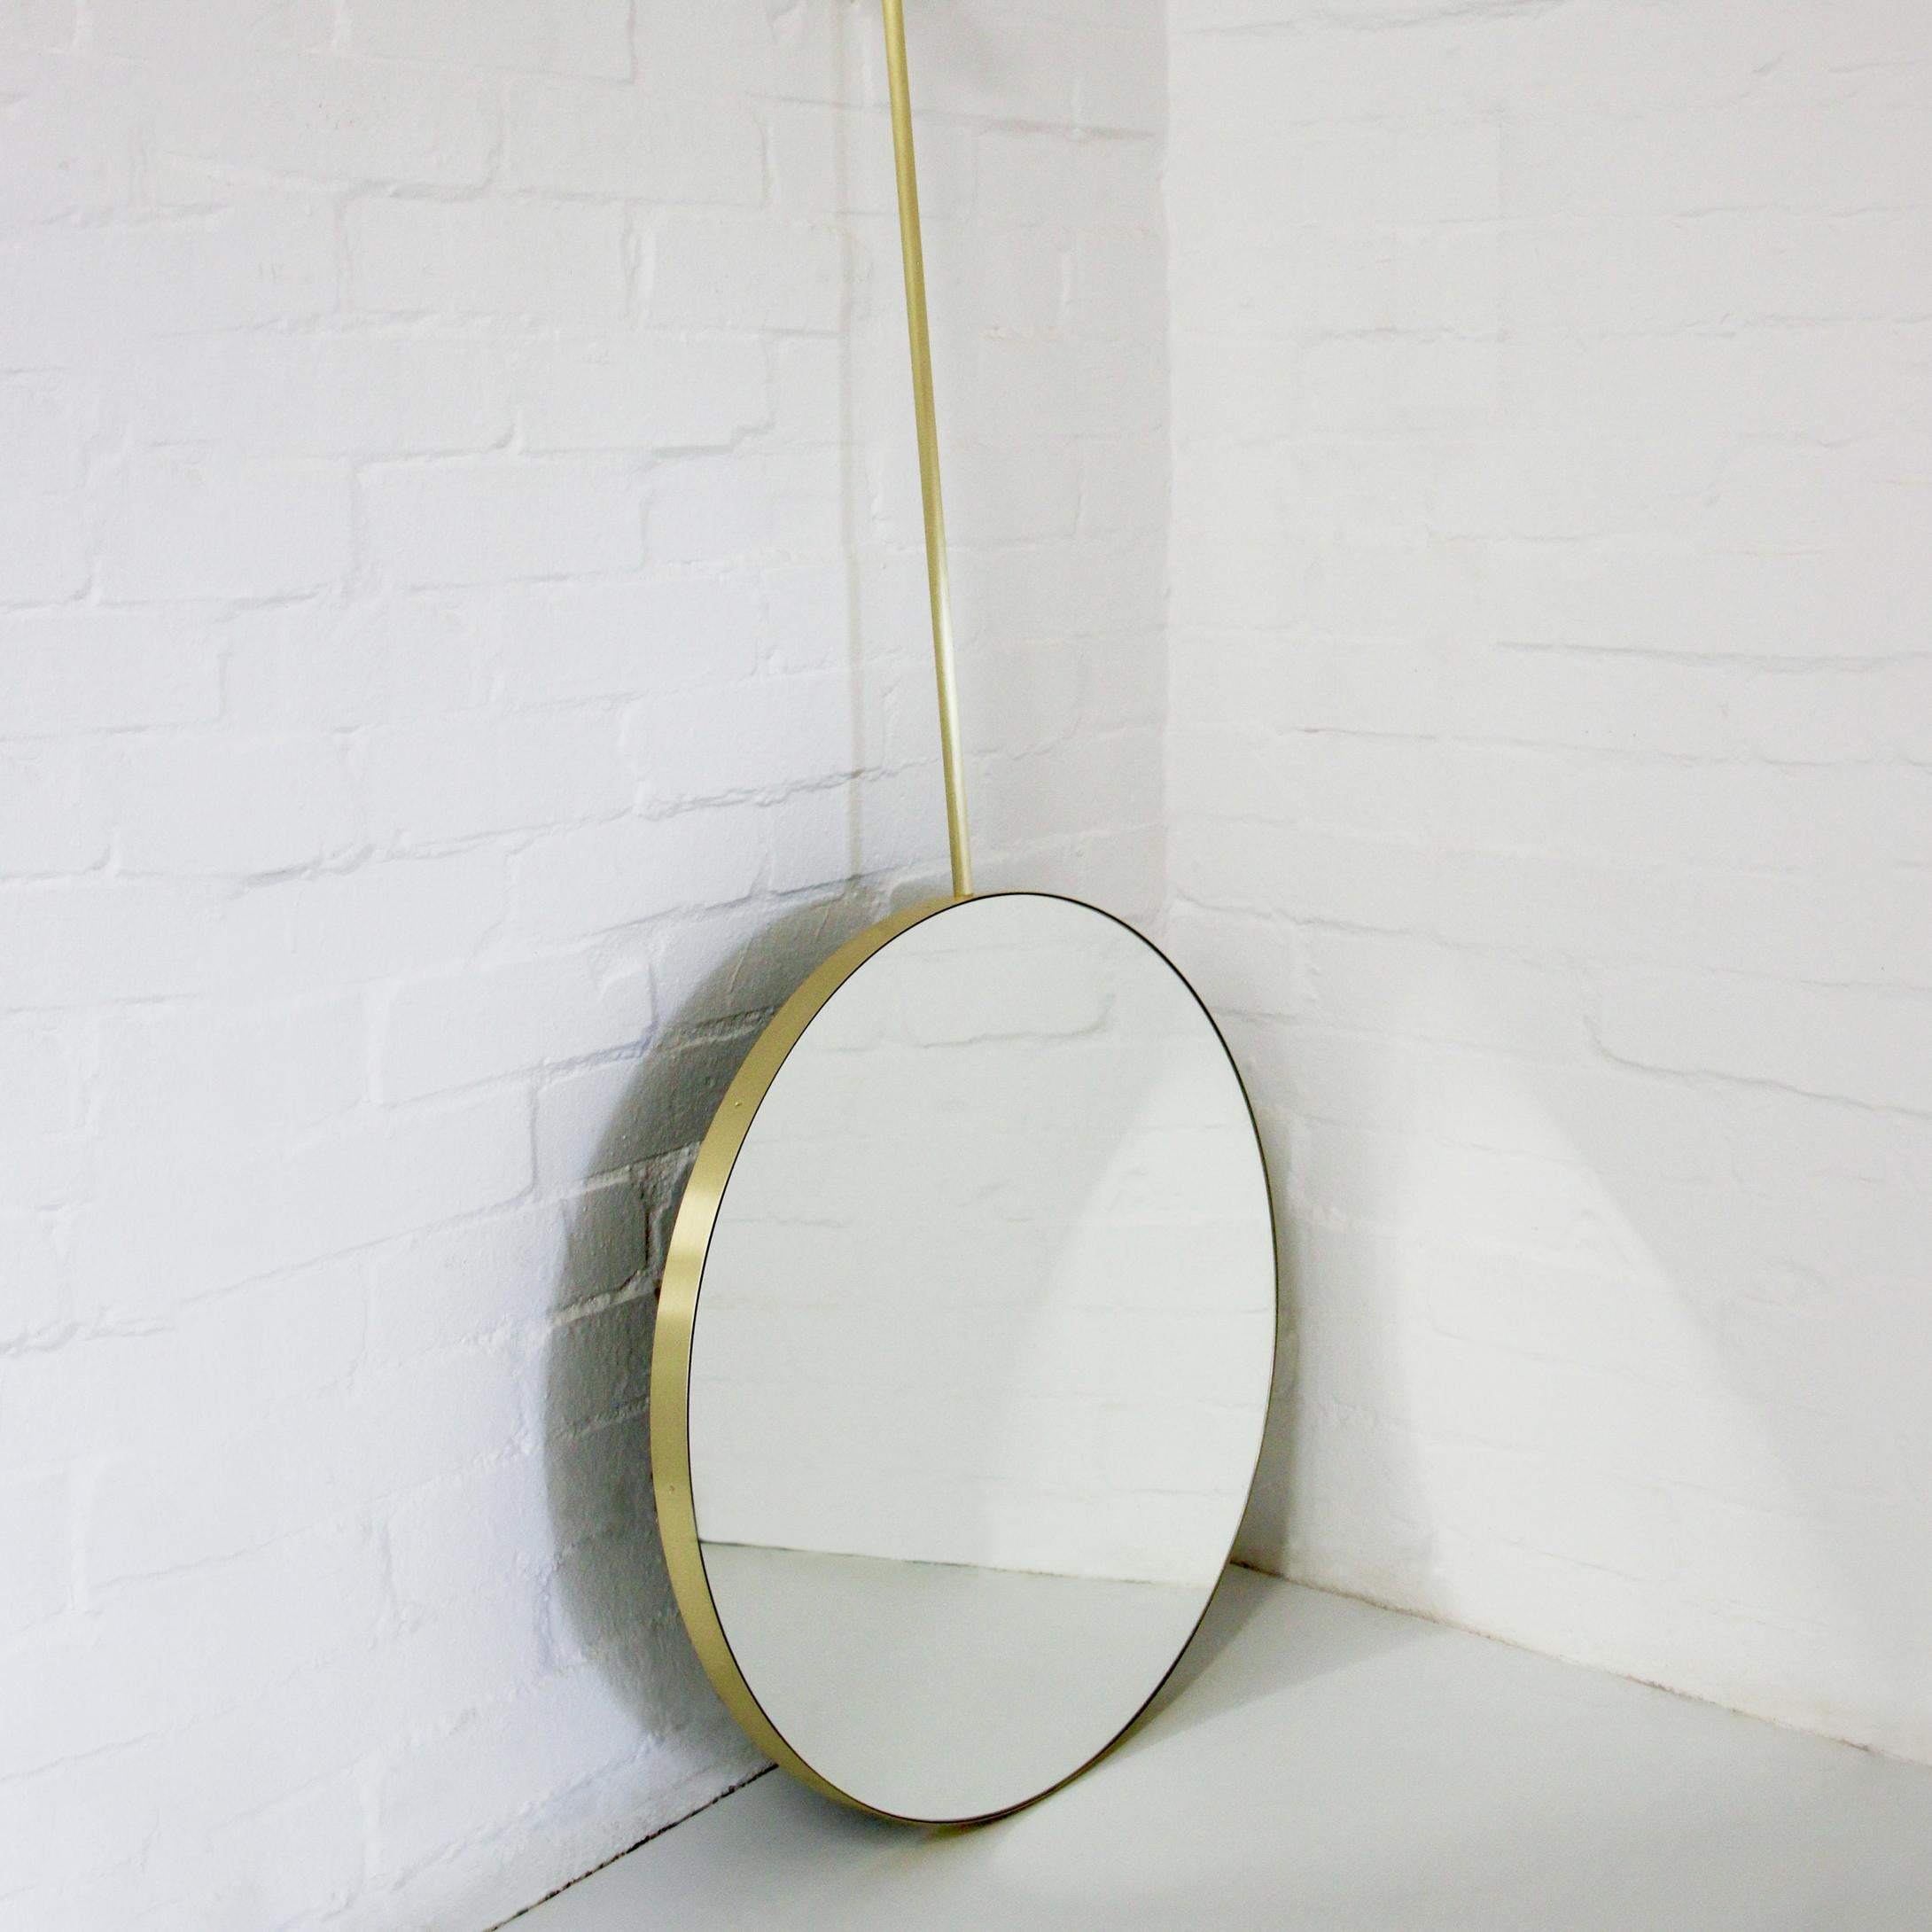 Beautiful ceiling suspended round mirror with an elegant brushed brass frame. 

Measures: 550mm (21.65